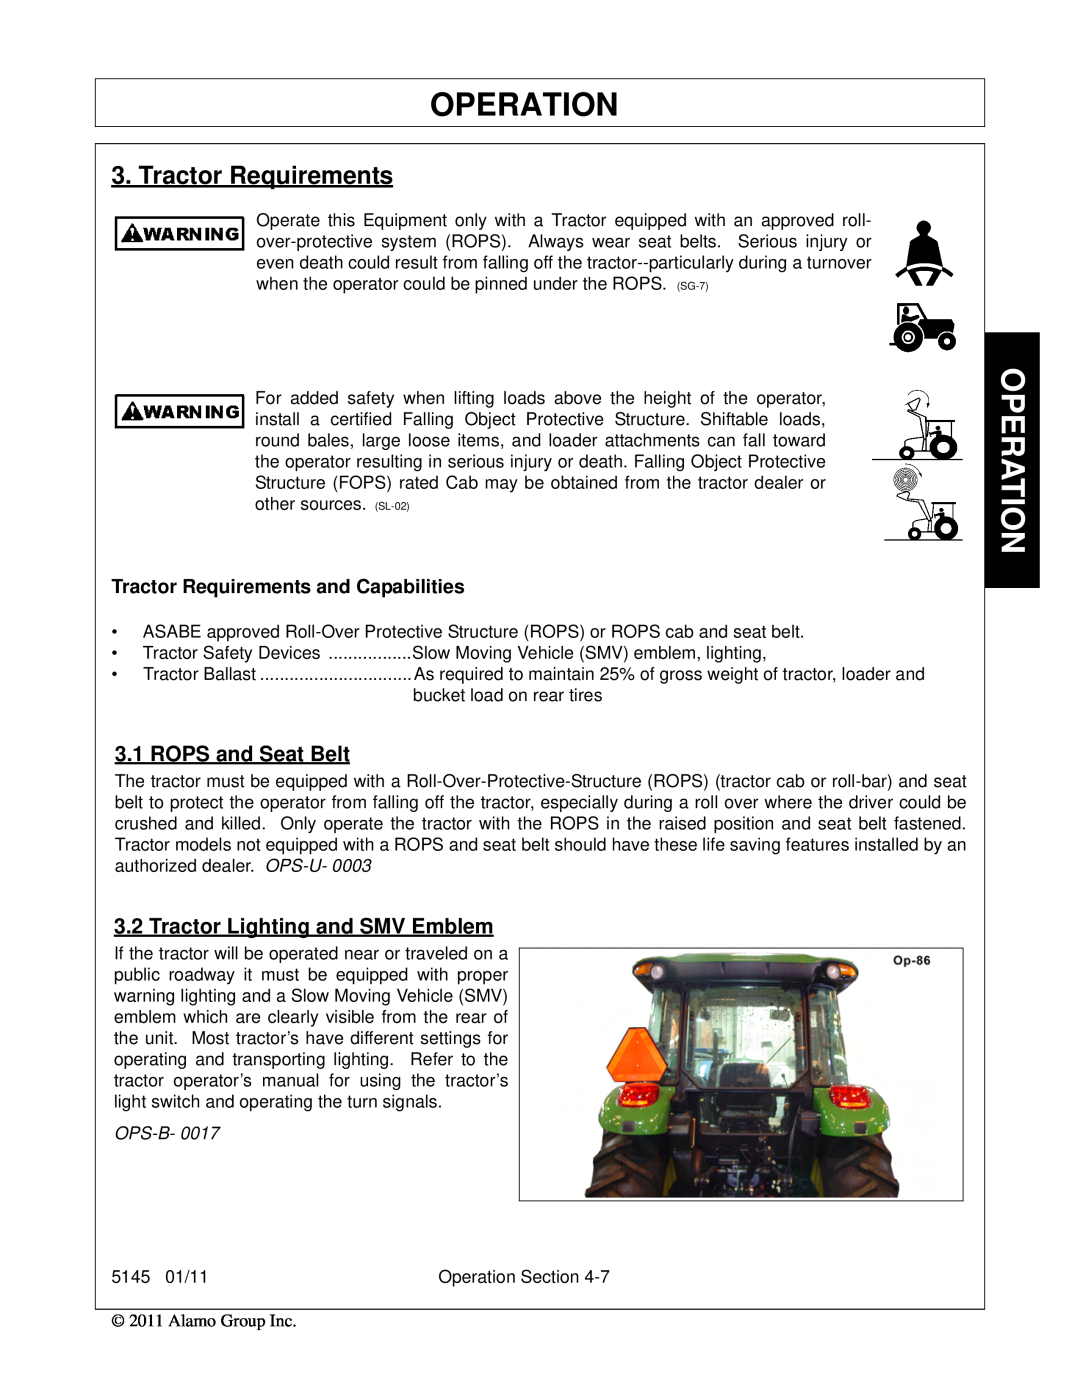 Bush Hog 5145 manual Operation, Tractor Requirements, ROPS and Seat Belt, Tractor Lighting and SMV Emblem, Ops-B 